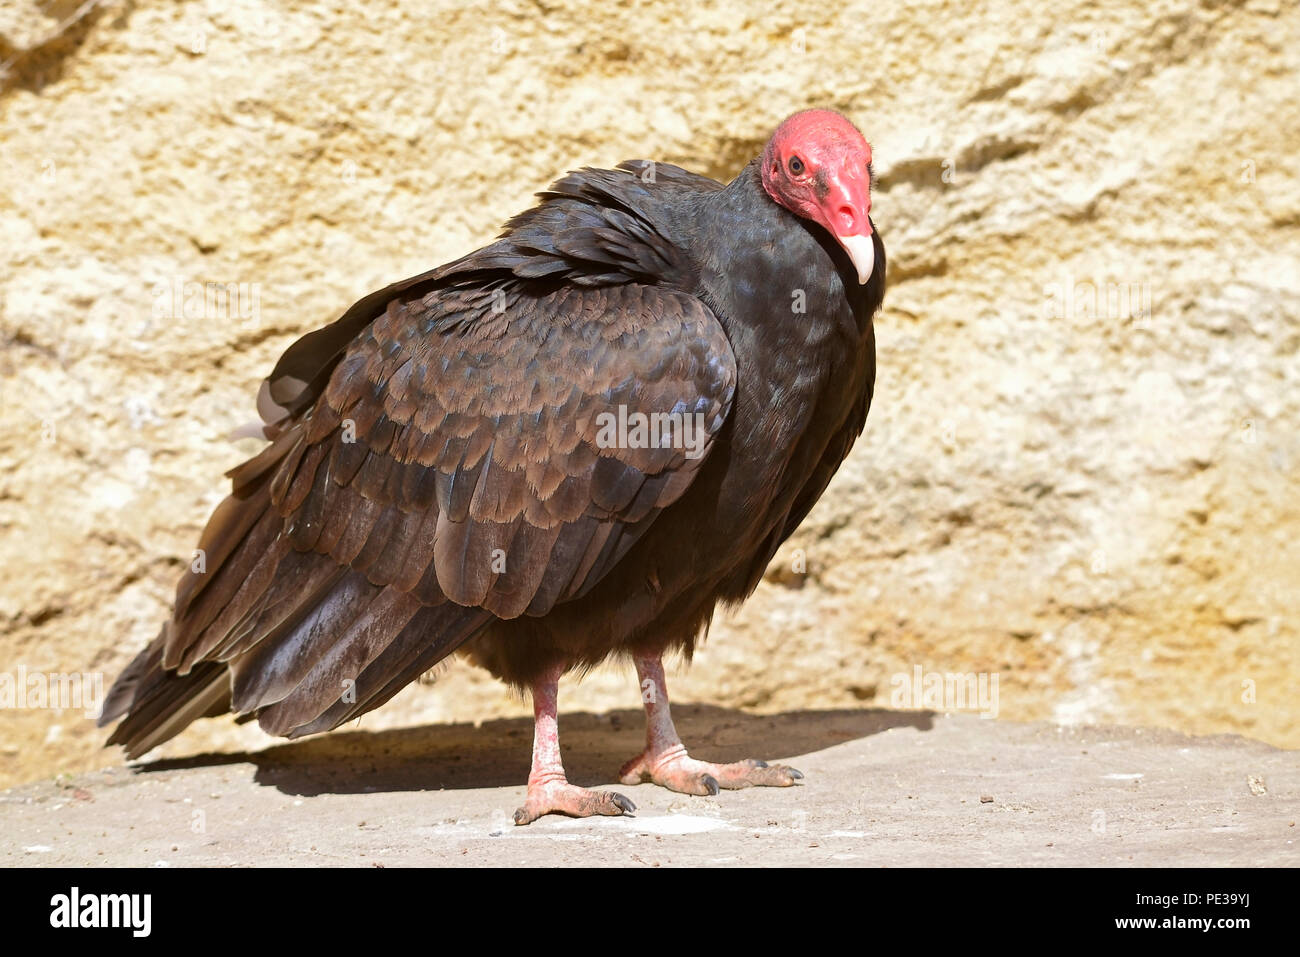 Turkey vulture (Cathartes aura) on ground on a rock face background Stock Photo